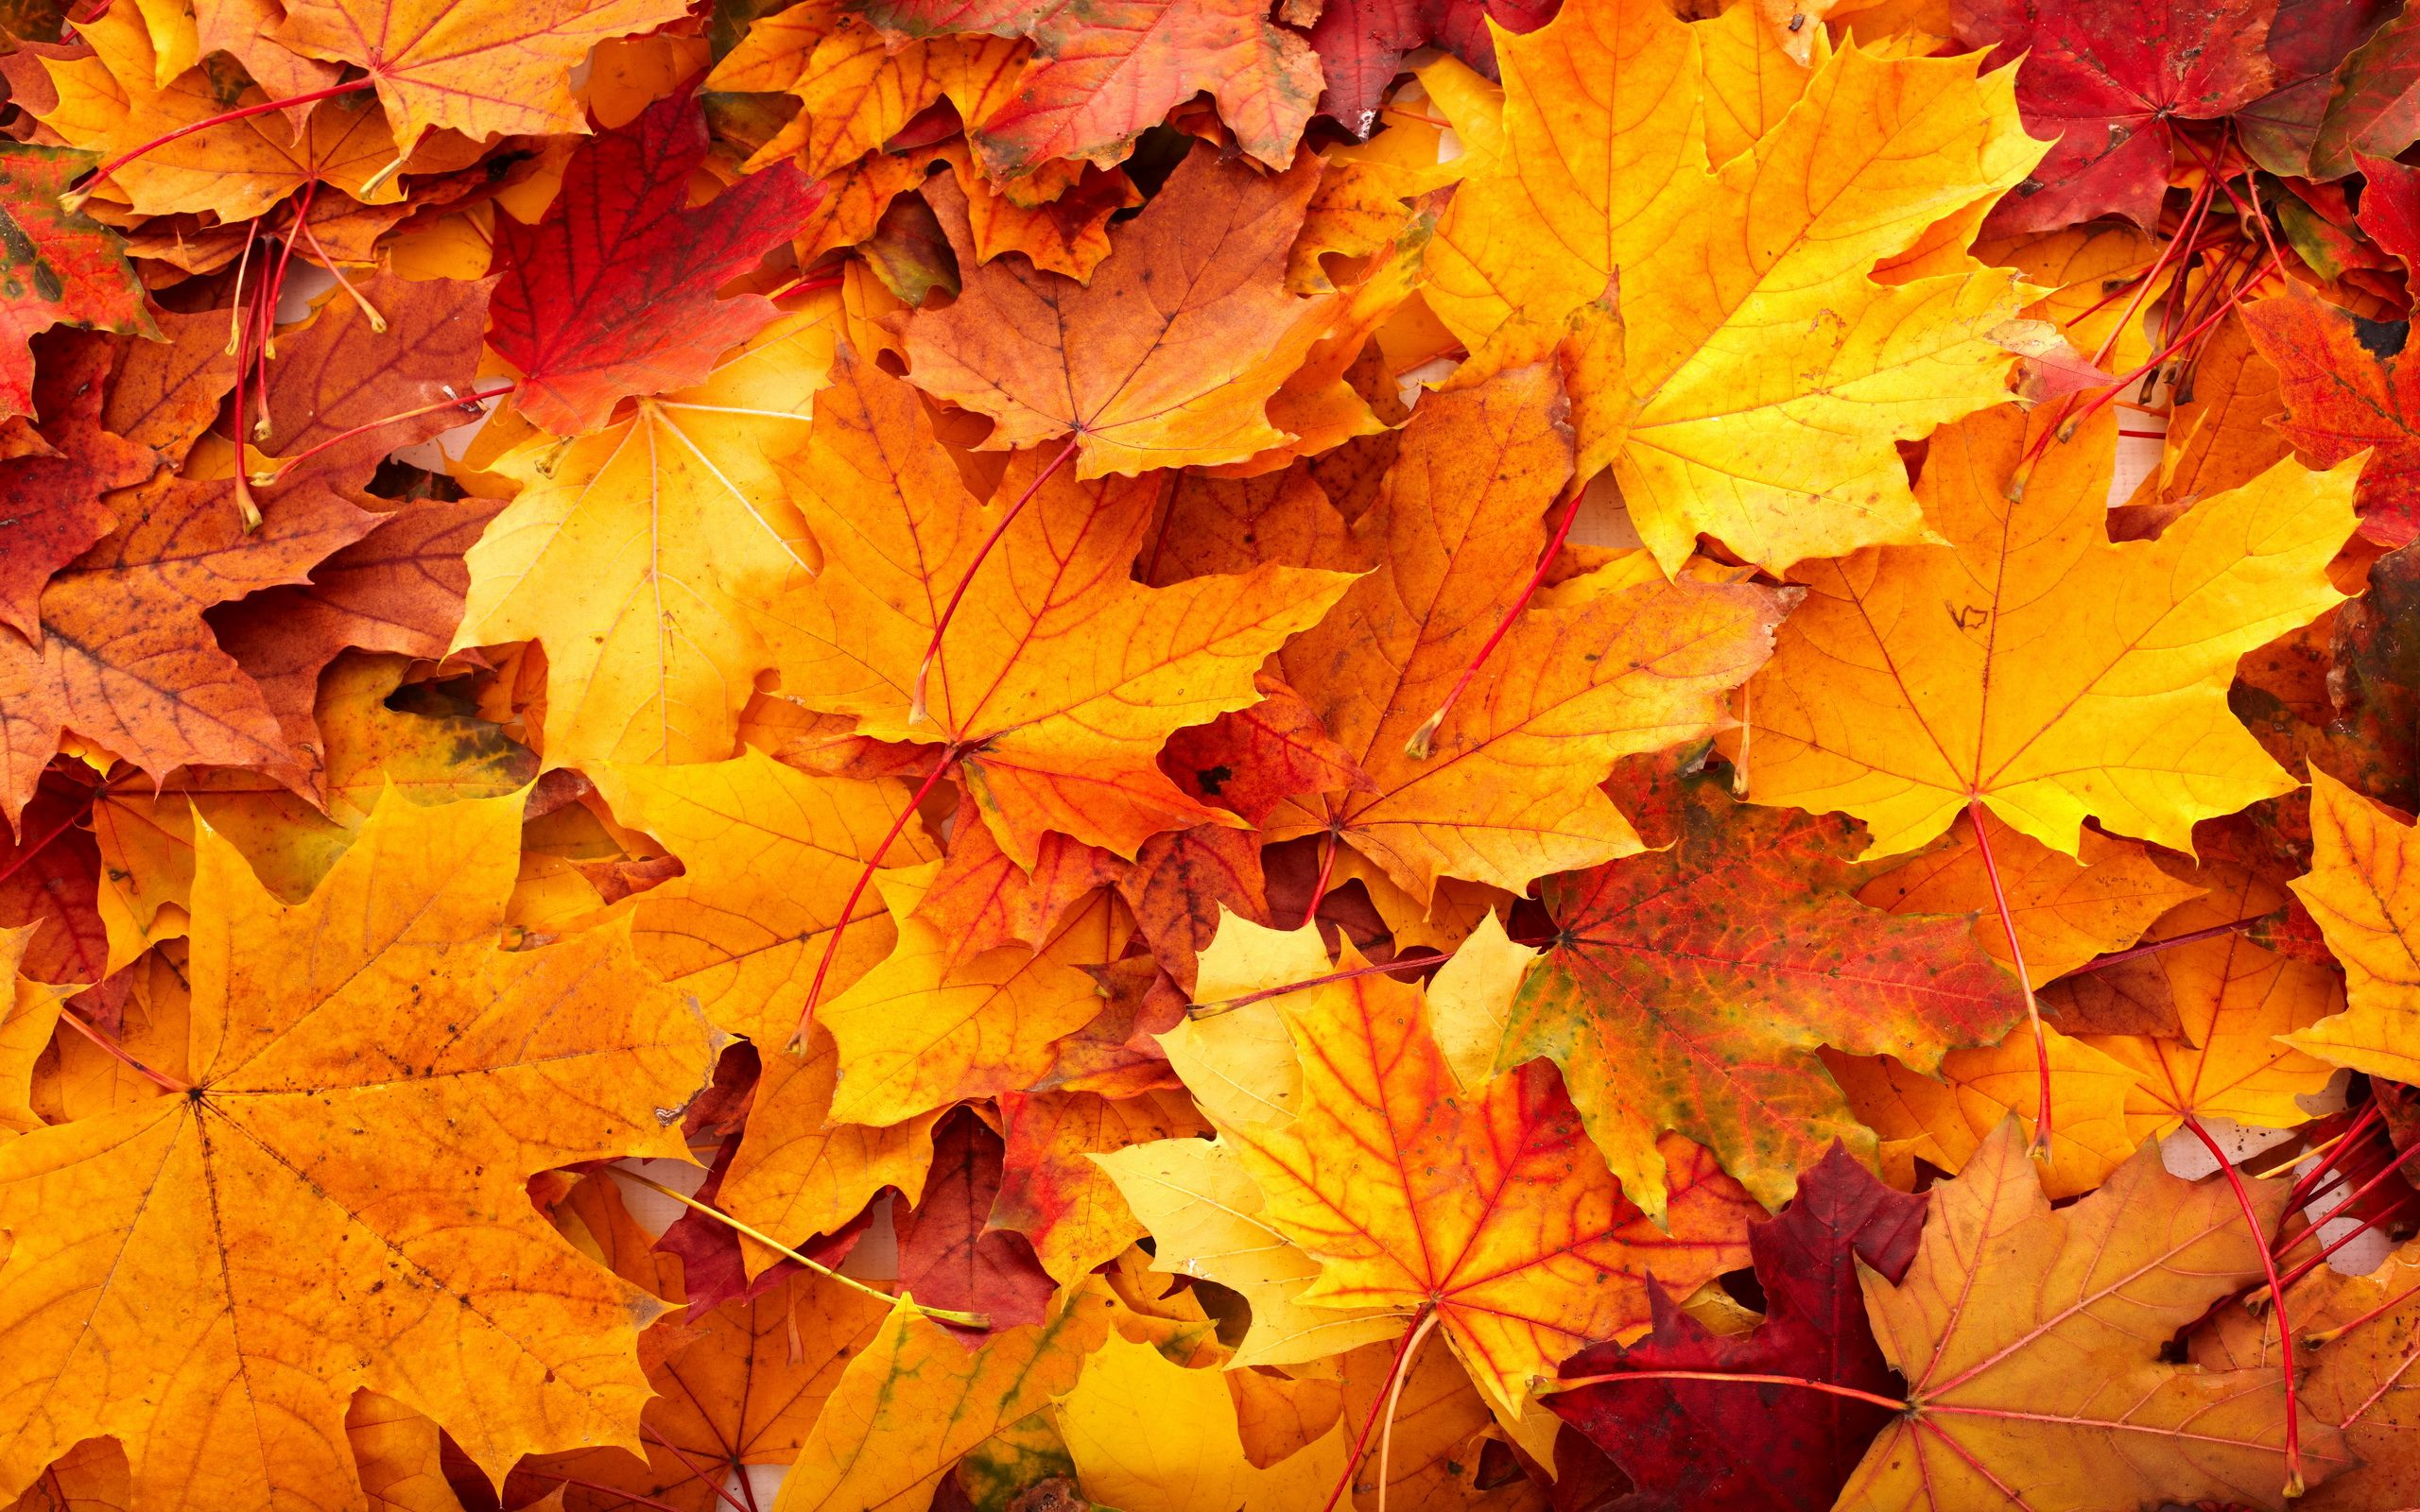 Image Gallery: A Rainbow of Fall Leaves